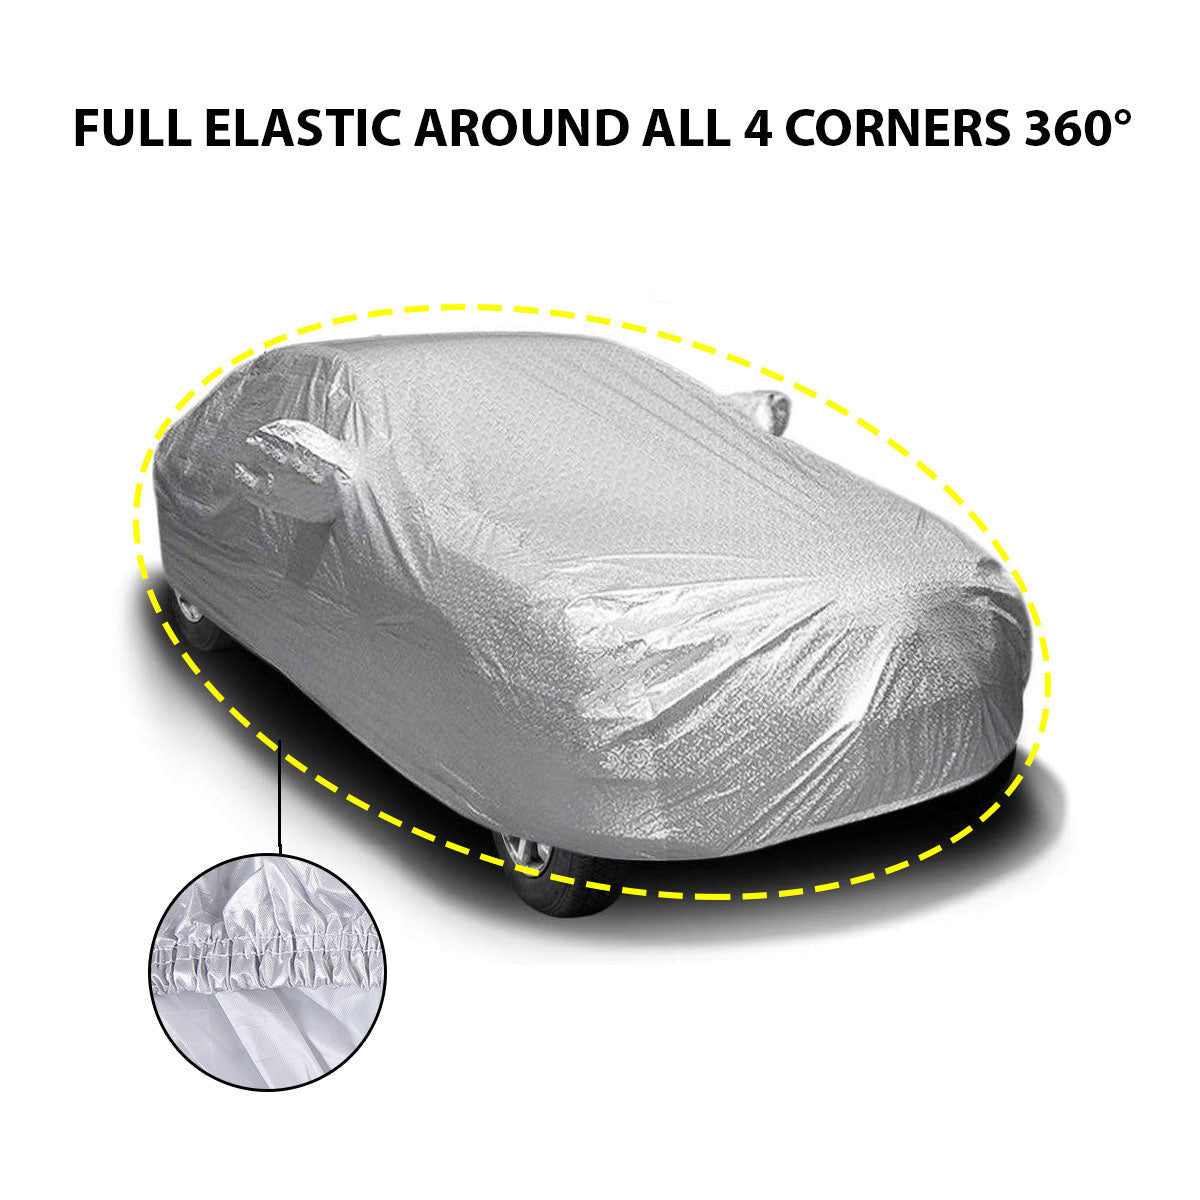 Oshotto Spyro Silver Anti Reflective, dustproof and Water Proof Car Body Cover with Mirror Pockets For Toyota Corolla Altis